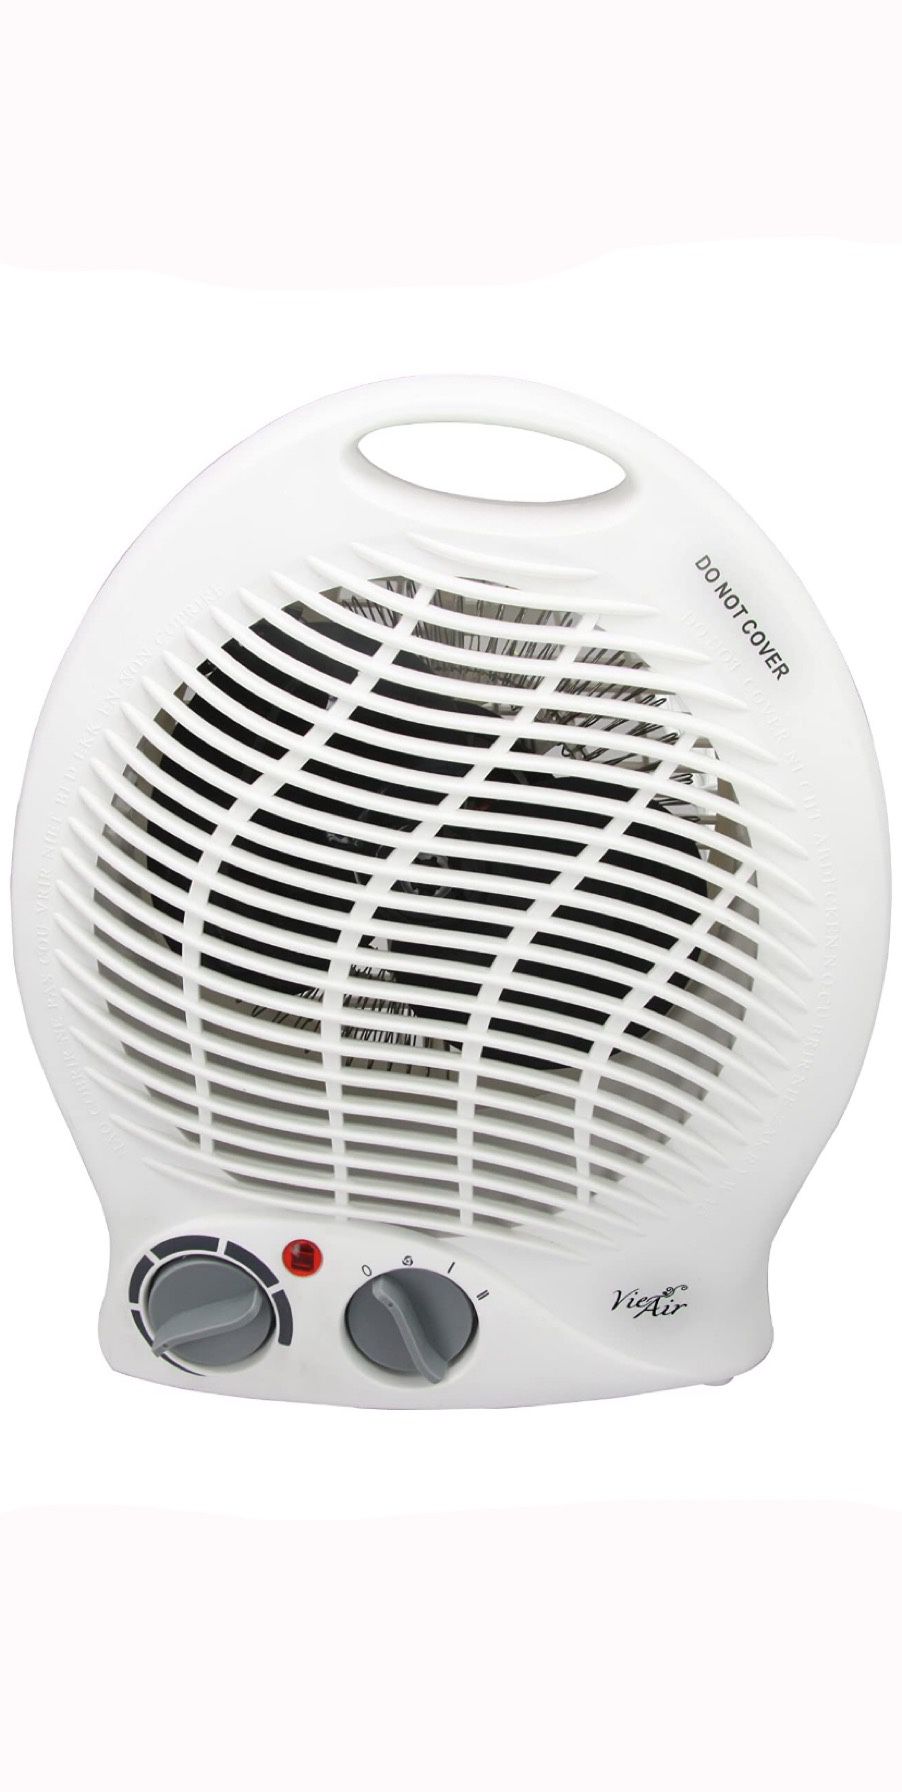 Vie Air 1500W Portable 2 setting White home fan heater with adjustable Thermostat